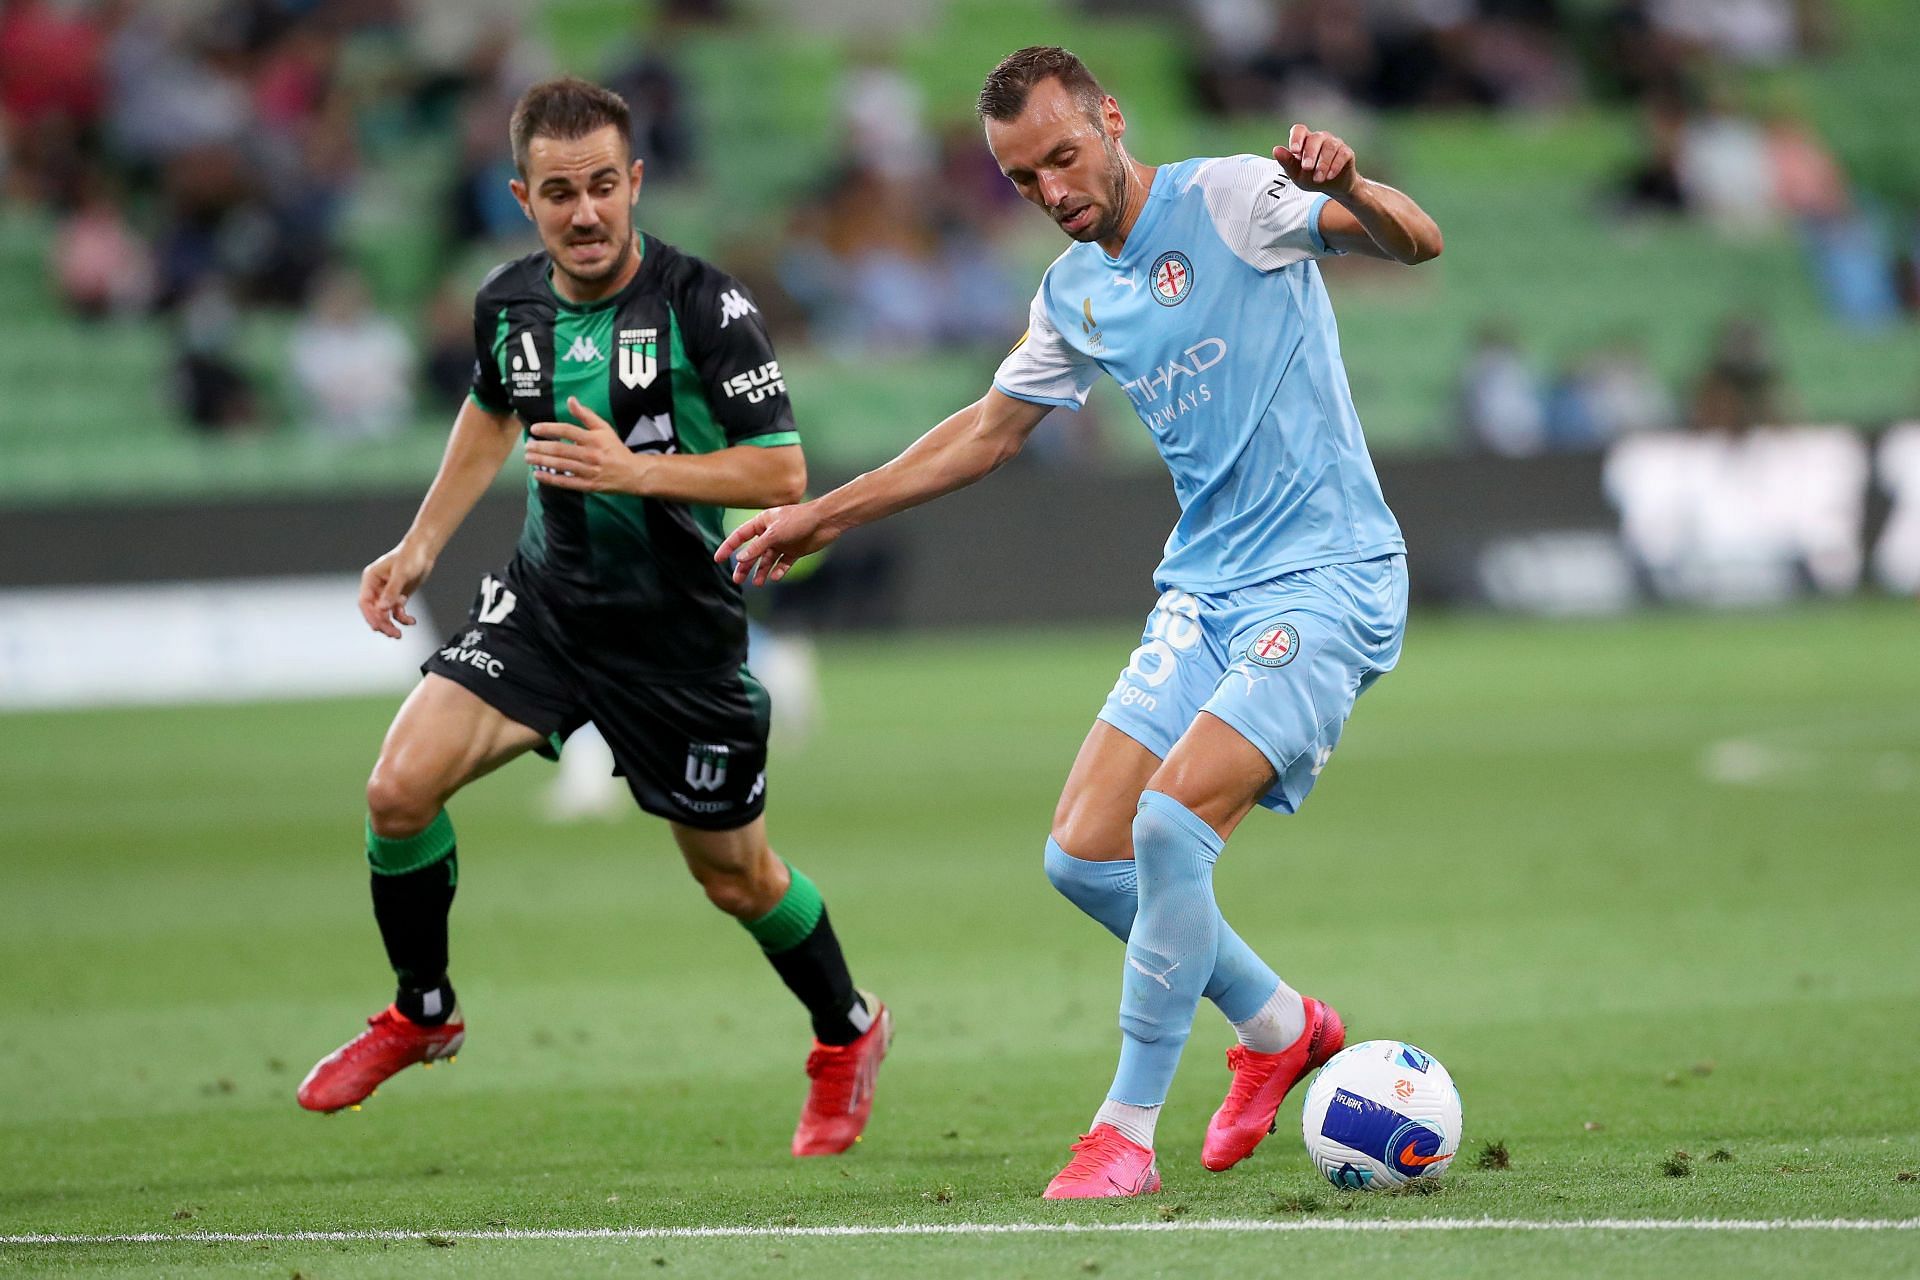 Western United take on Melbourne City this weekend